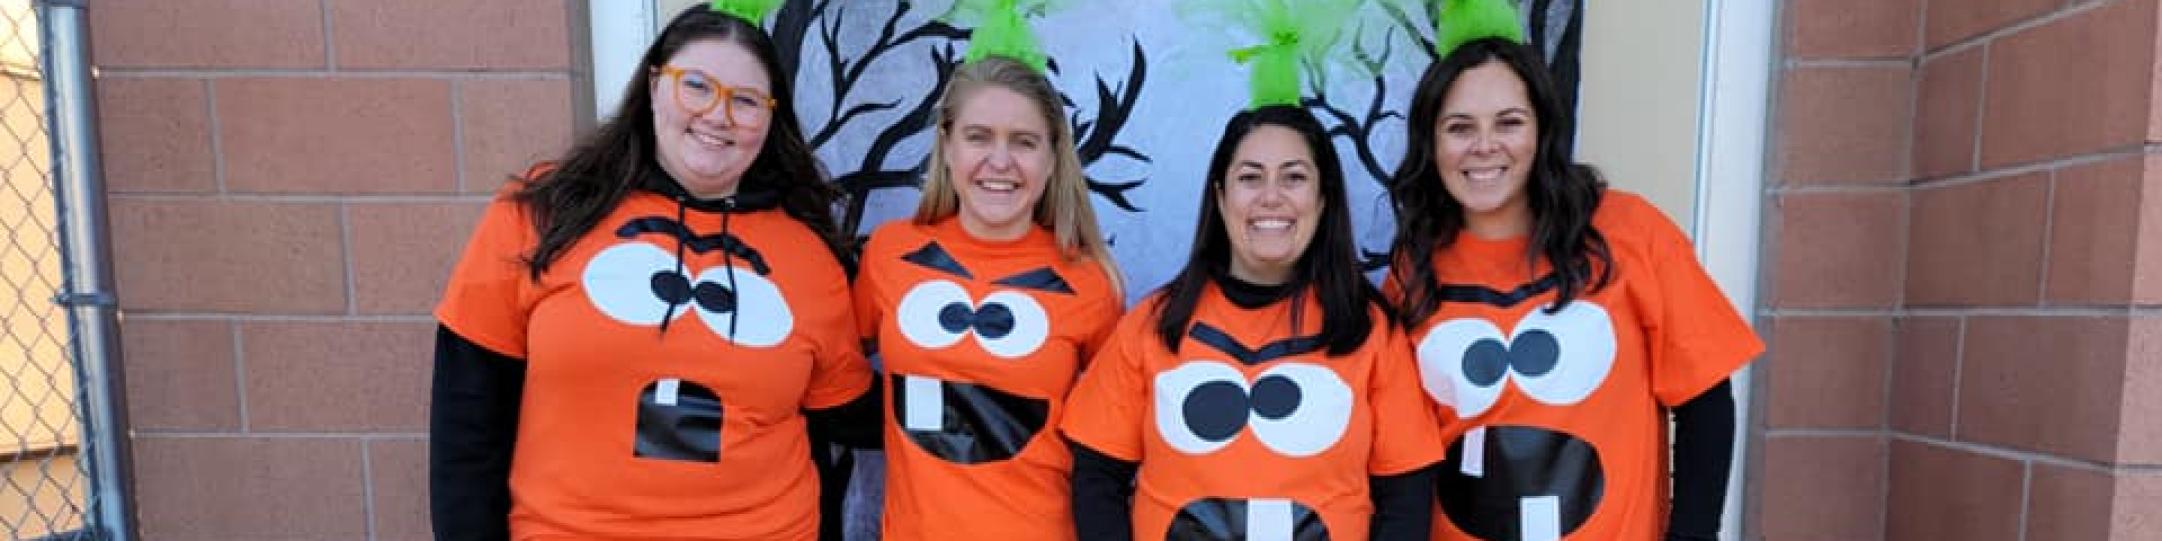 First Grade Teachers dressed up at the Fall Festival